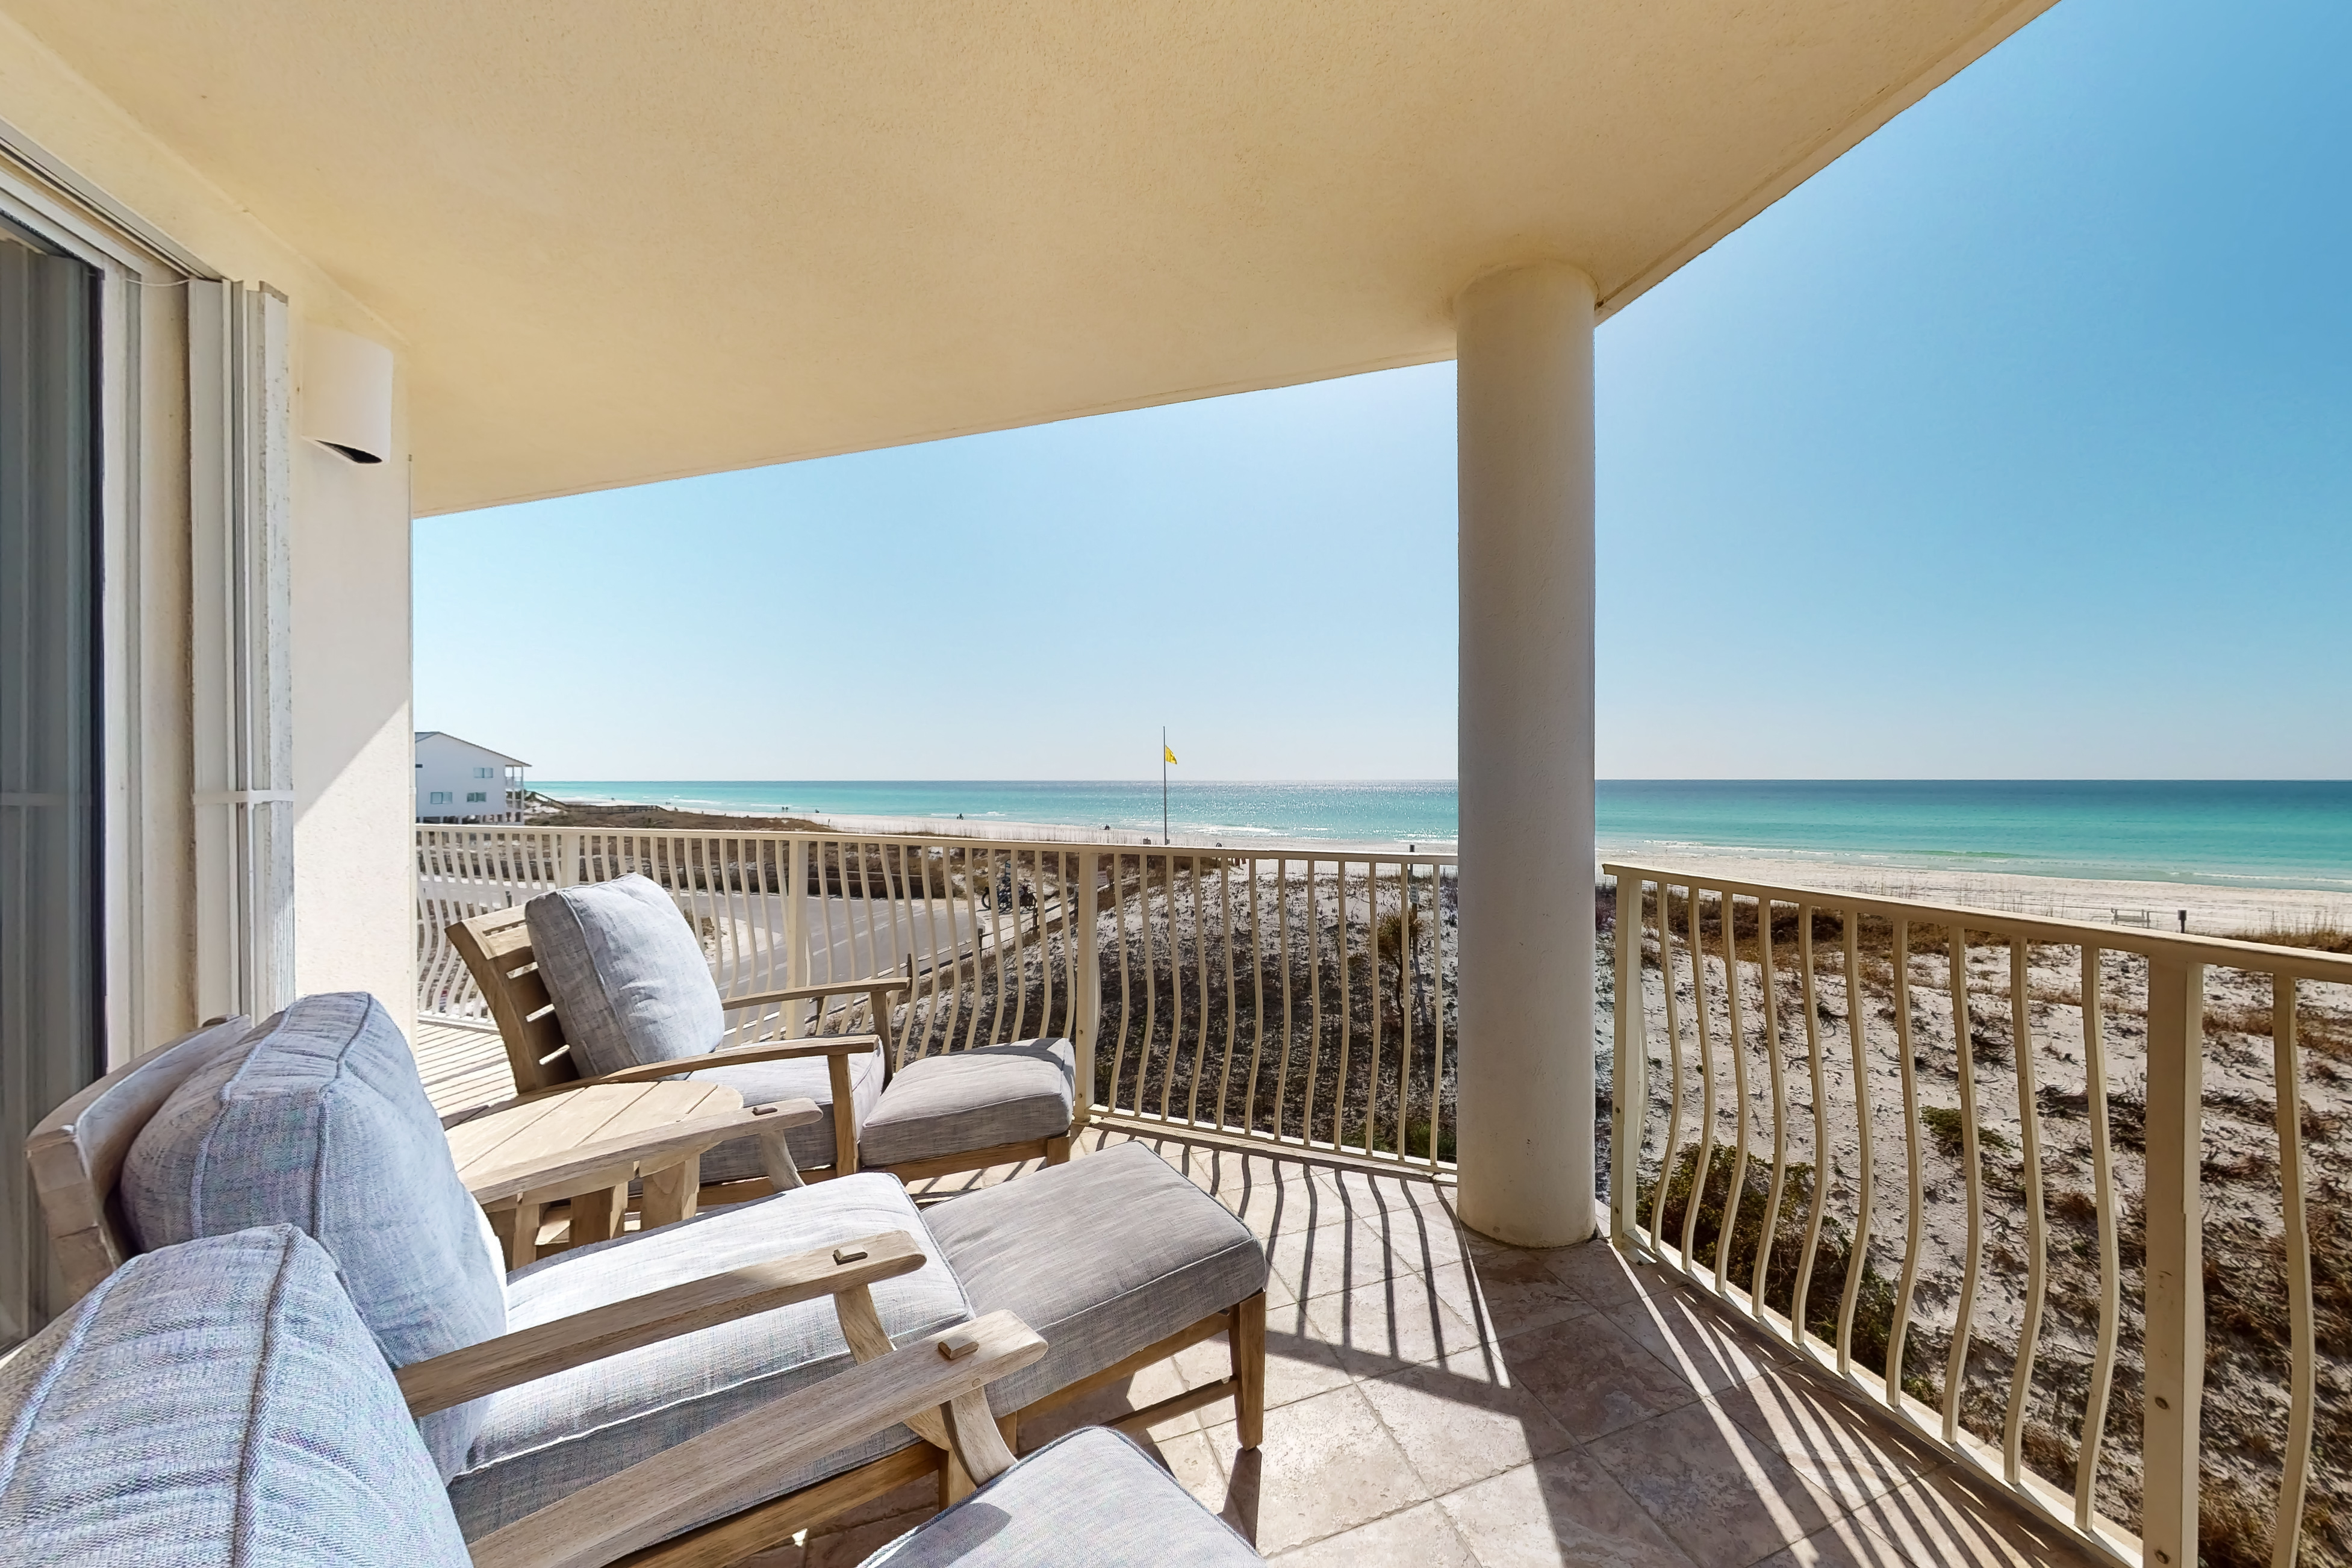 Dunes of Seagrove A209 Condo rental in Dunes of Seagrove in Highway 30-A Florida - #29